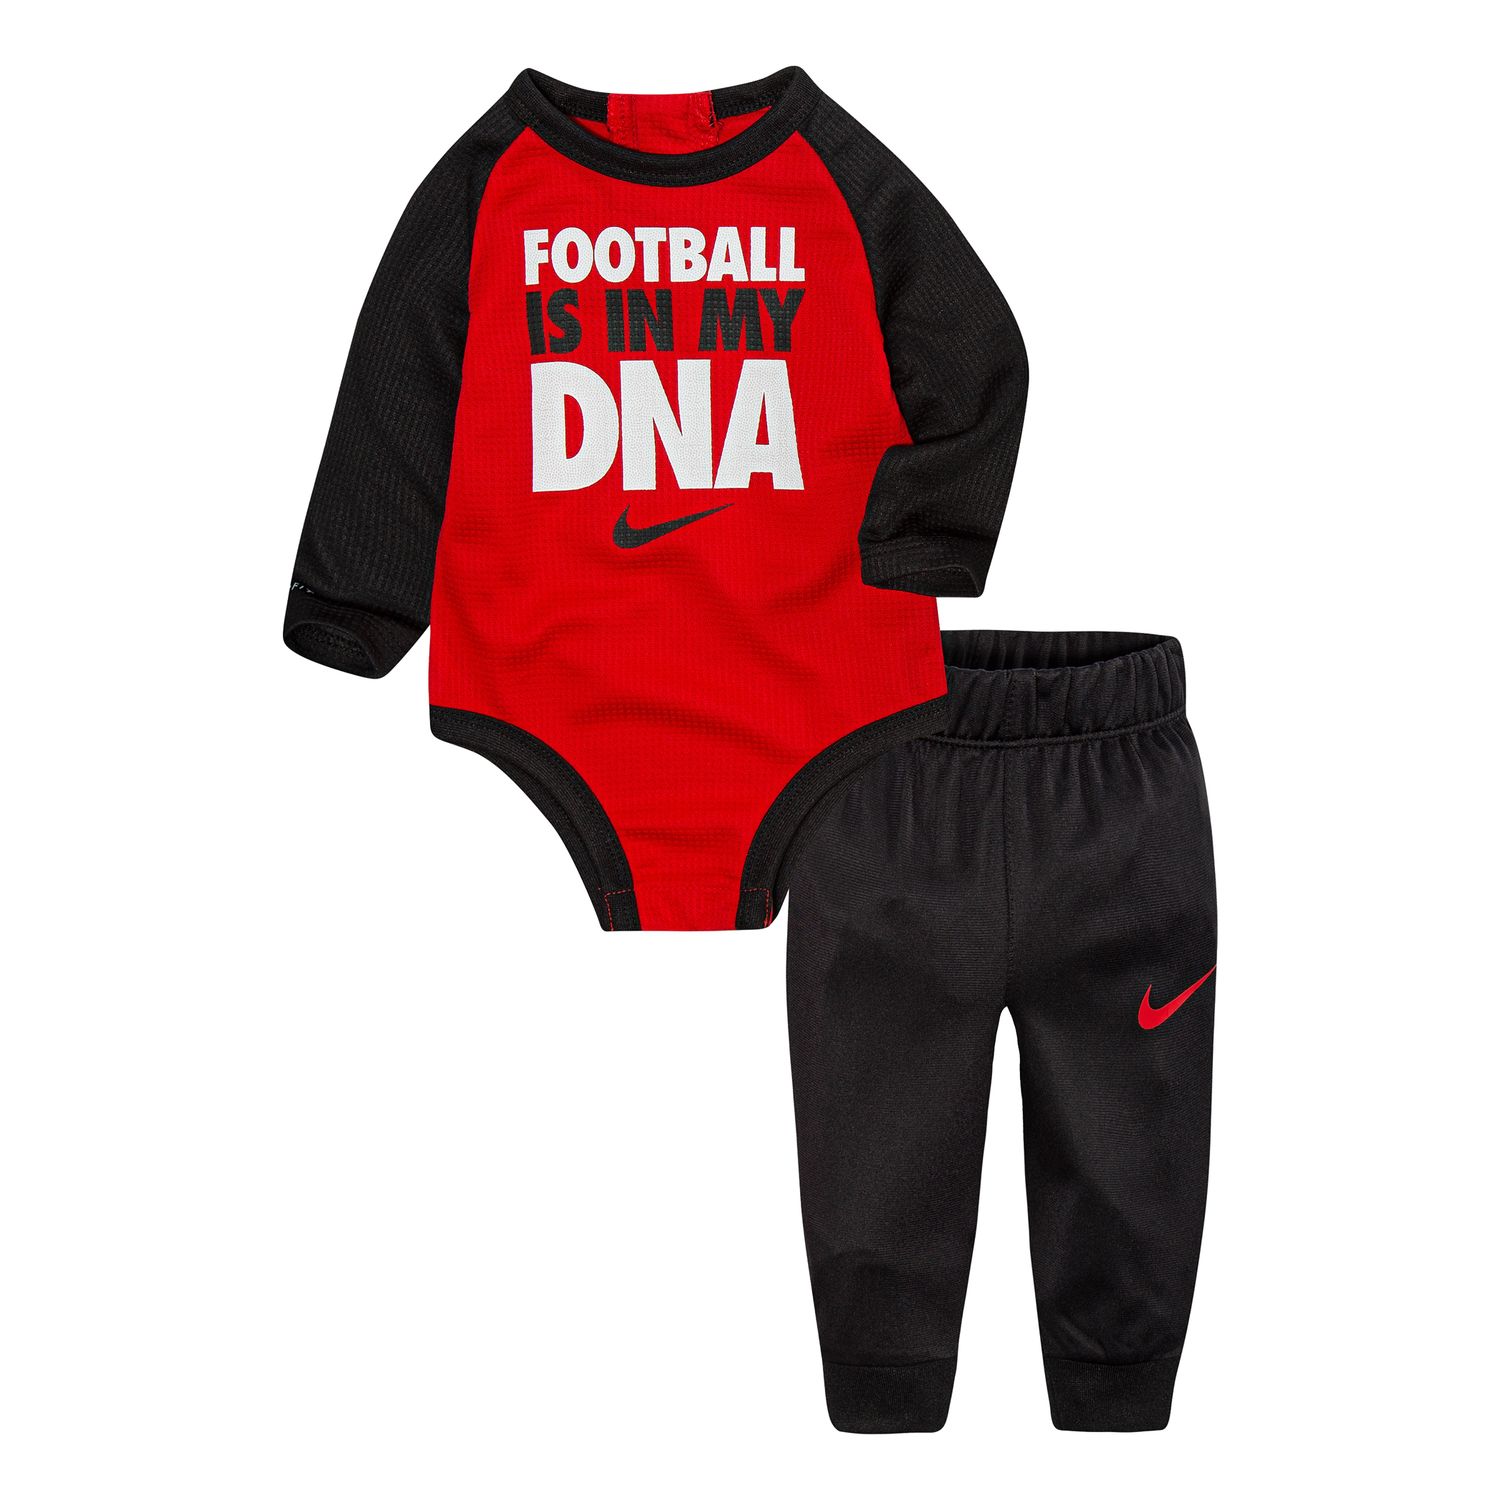 nike outfits for baby boy